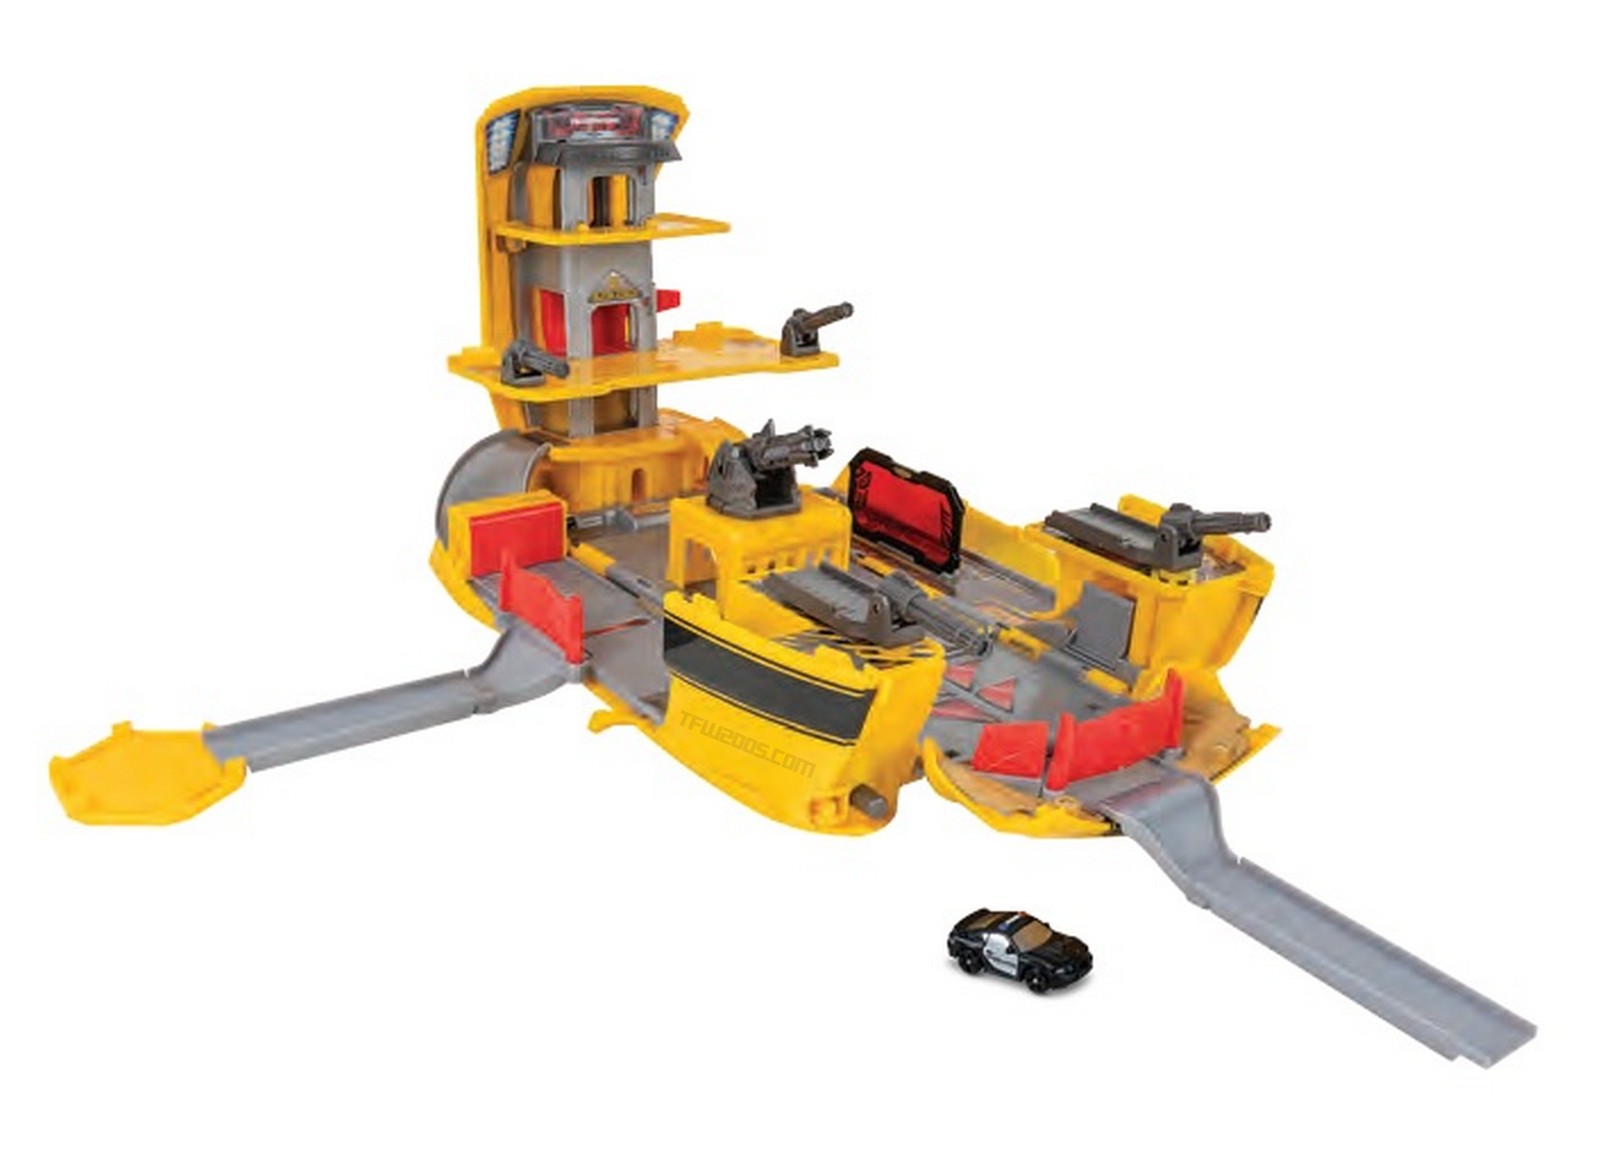 Transformers News: Listing and Image for Micromachines Bumblebee Playset